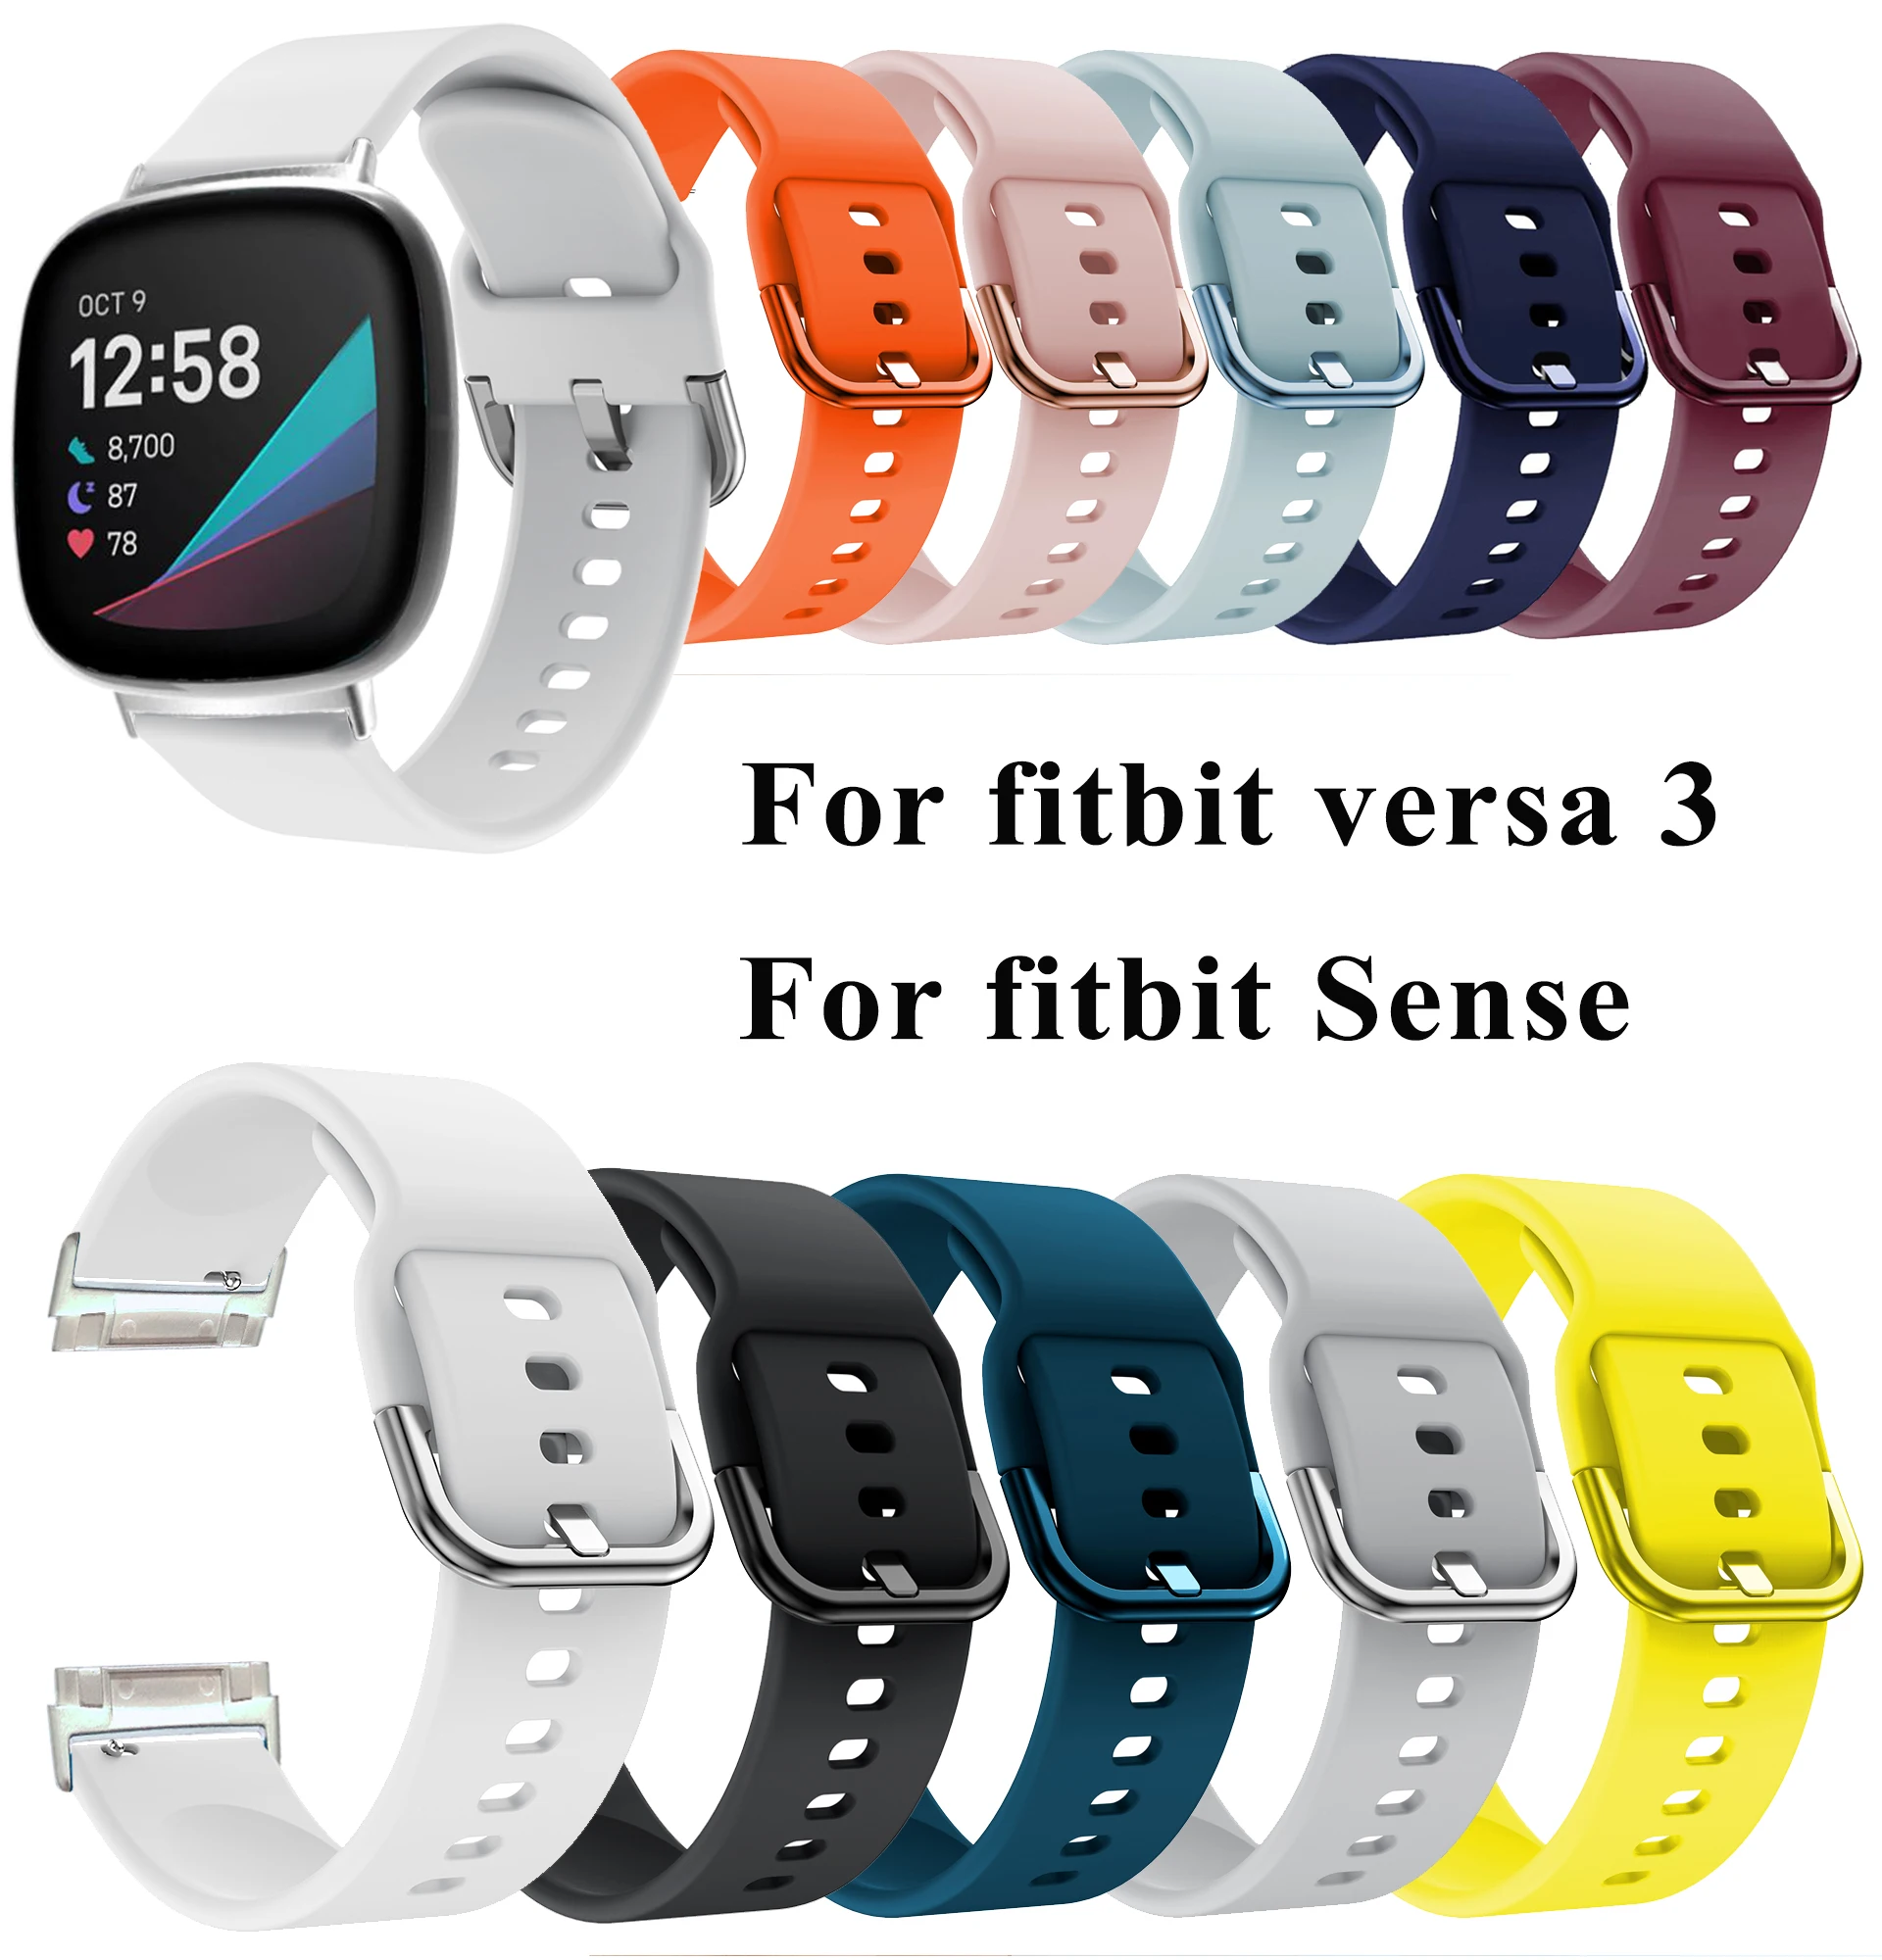 

Watch Strap for Fitbit Versa 3 Band Soft Sport Silicone Bracelet Versa3 Wristband Correa for Fitbit Sense Bands Accessories